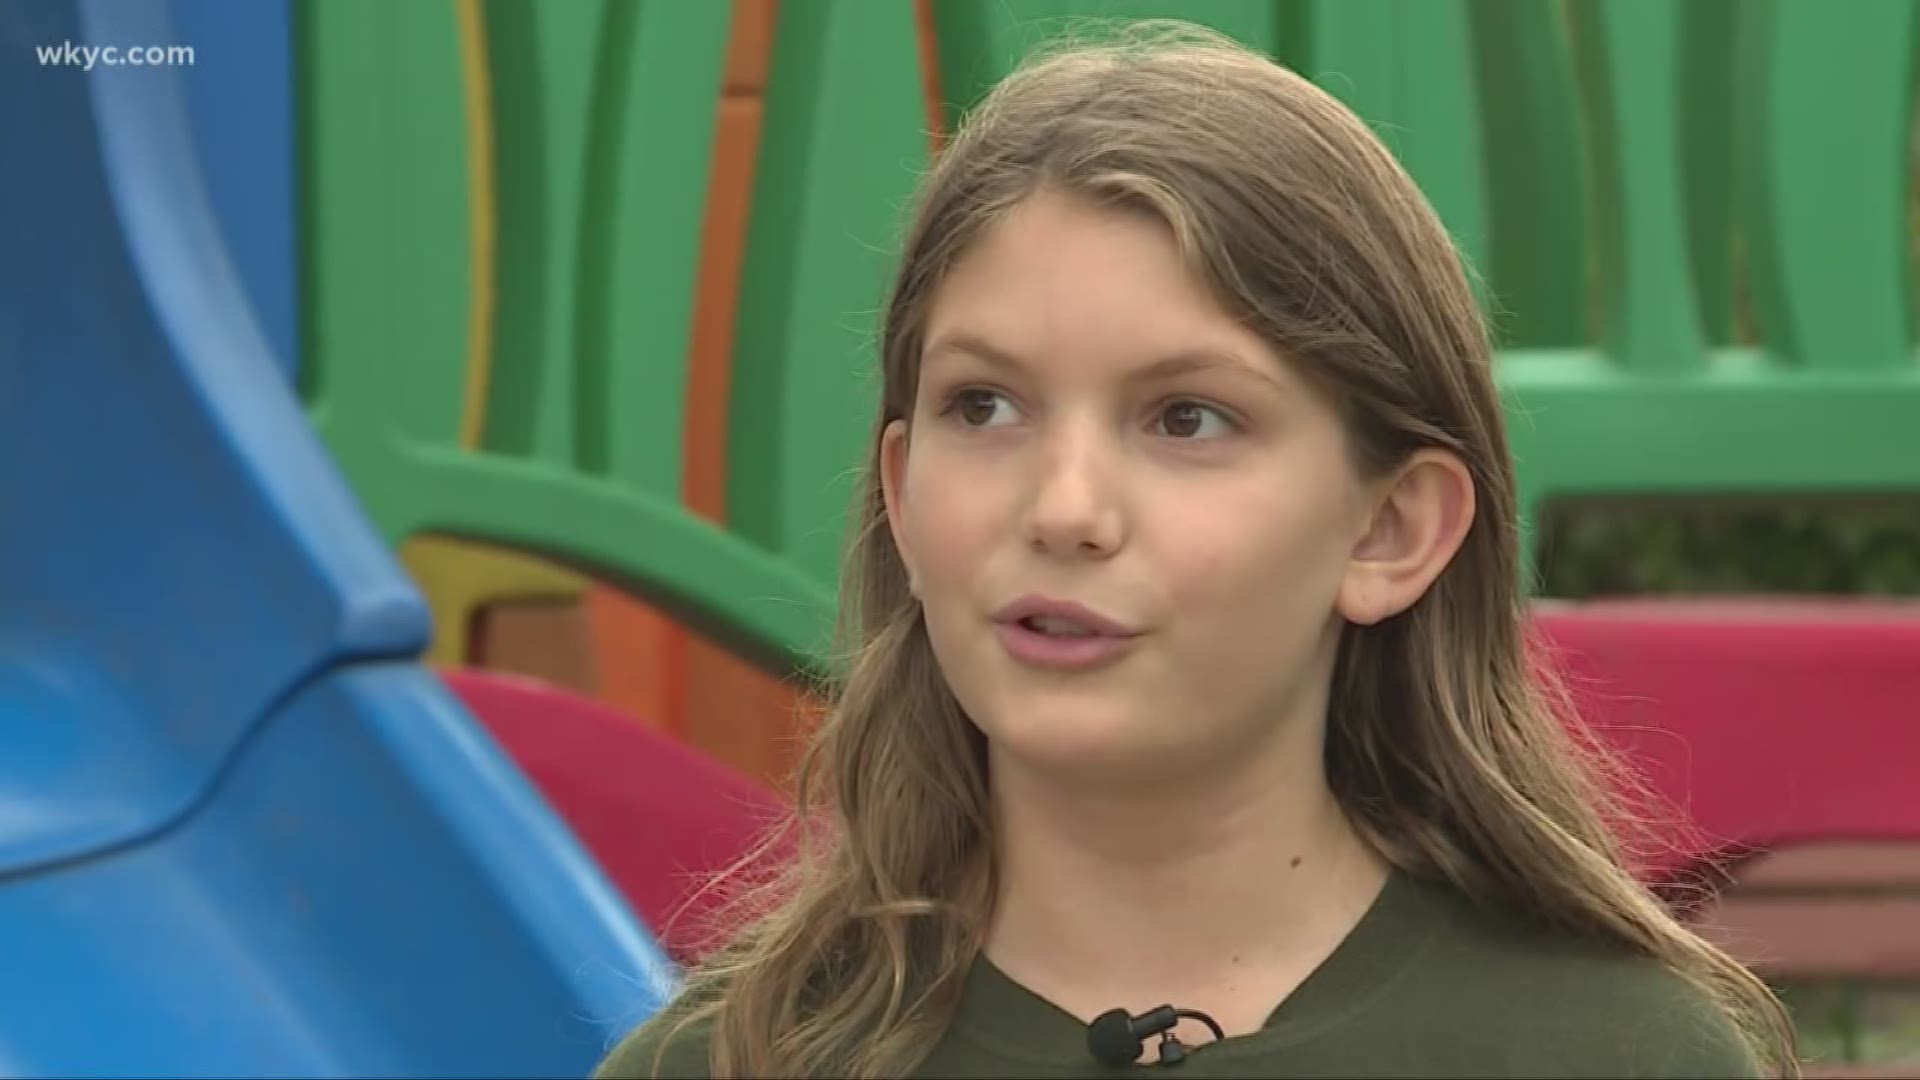 Local girl scout speaks out about what she thought was sexist comment at a parade